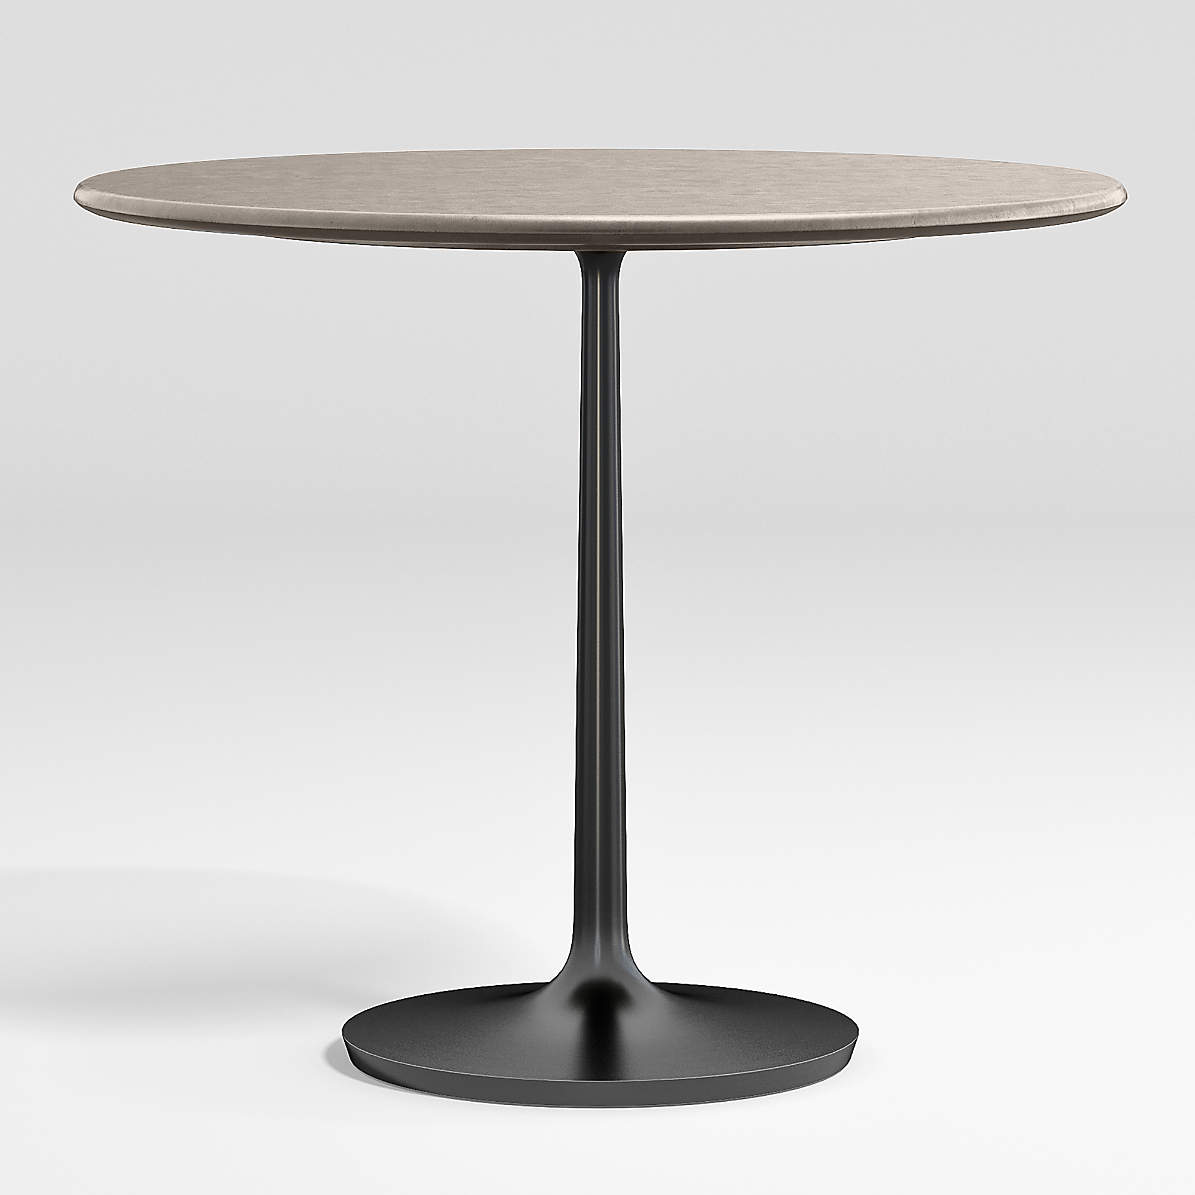 Nero 48 Concrete Dining Table With, Round Table Pedestal Base Black